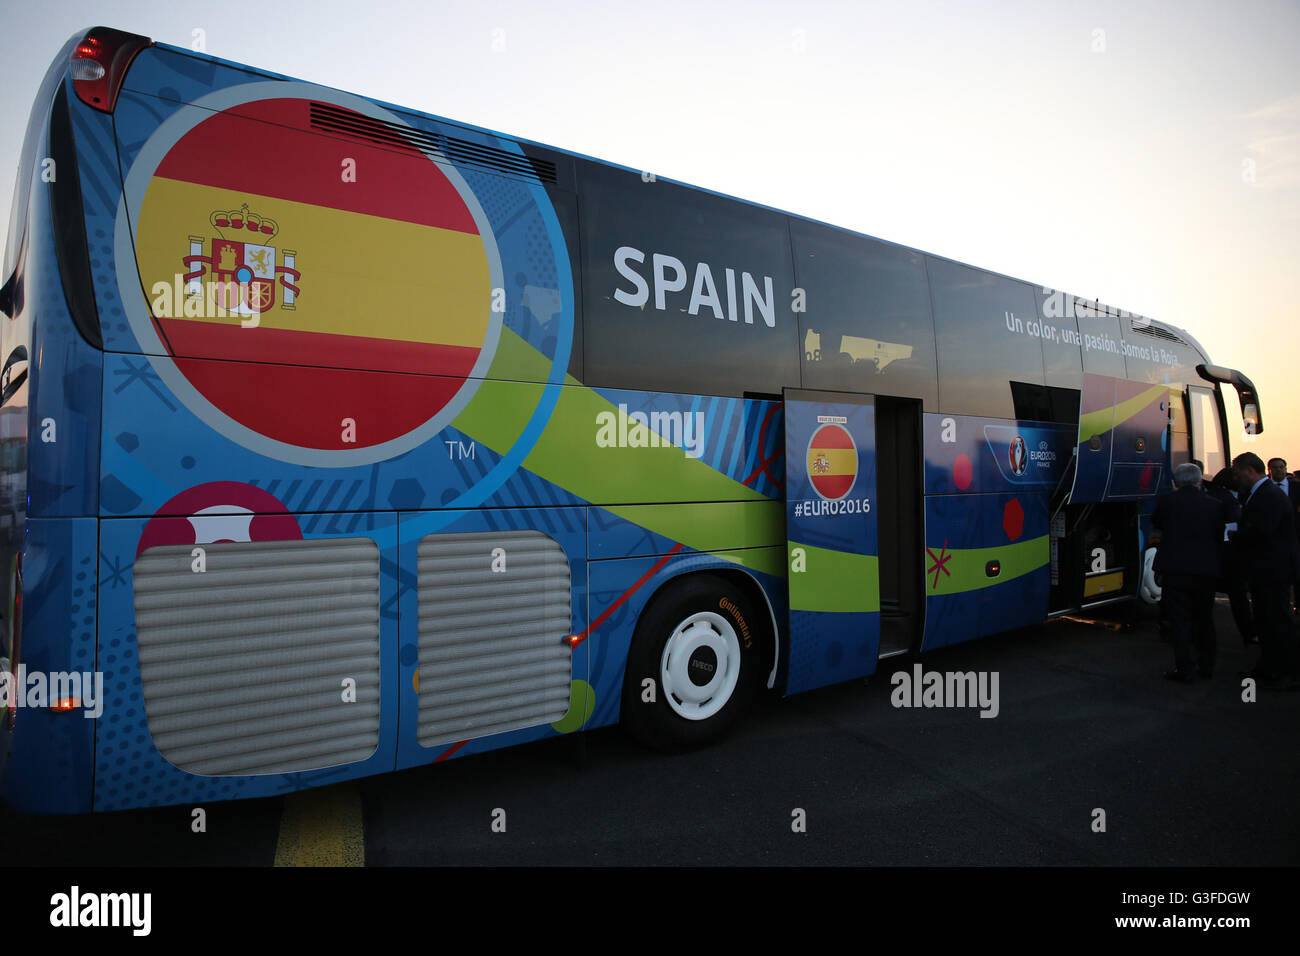 La Rochelle, France. 08th June, 2016. The Spanish mens national football team arrive in La Rochelle ahead of their participation in the Euro 2016 football tournament. The official travel bus © Action Plus Sports/Alamy Live News Stock Photo